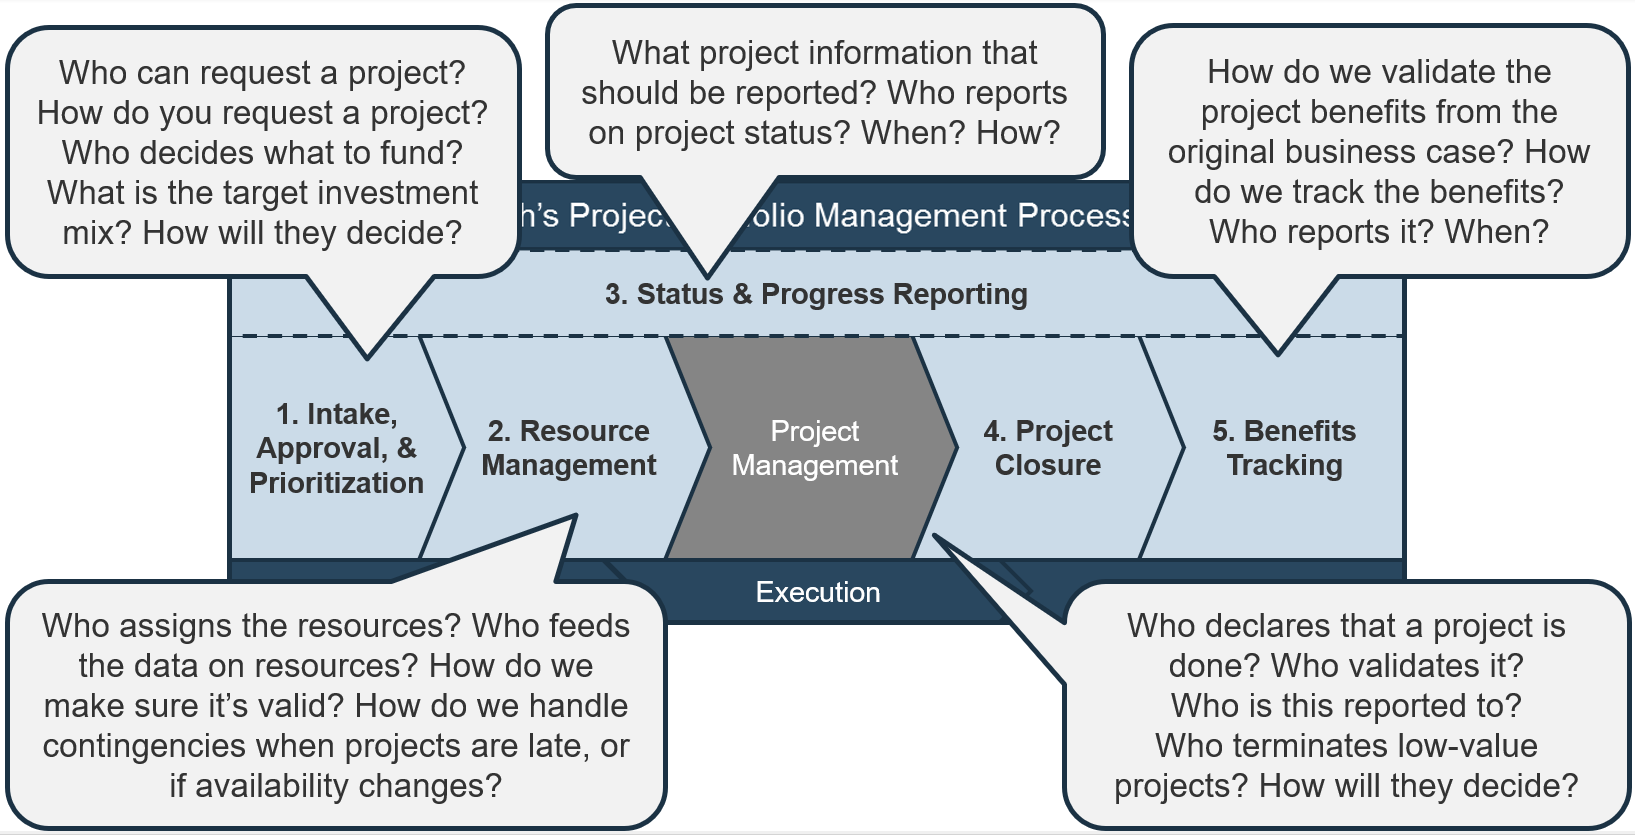 Info-Tech's PPM Process Model from earlier with notes overlaid asking a series of questions. The questions for '1. Intake, Approval, and Prioritization' are 'Who can request a project? How do you request a project? Who decides what to fund? What is the target investment mix? How will they decide?' The questions for '2. Resource Management' are 'Who assigns the resources? Who feeds the data on resources? How do we make sure it’s valid? How do we handle contingencies when projects are late, or if availability changes?' The questions for '3. Status and Progress Reporting' are 'What project information that should be reported? Who reports on project status? When? How?' The questions between 'Project Management' and '4. Project Closure' are 'Who declares that a project is done? Who validates it? Who is this reported to? Who terminates low-value projects? How will they decide?' The questions for '5. Benefits Tracking' are 'How do we validate the project benefits from the original business case? How do we track the benefits? Who reports it? When?'